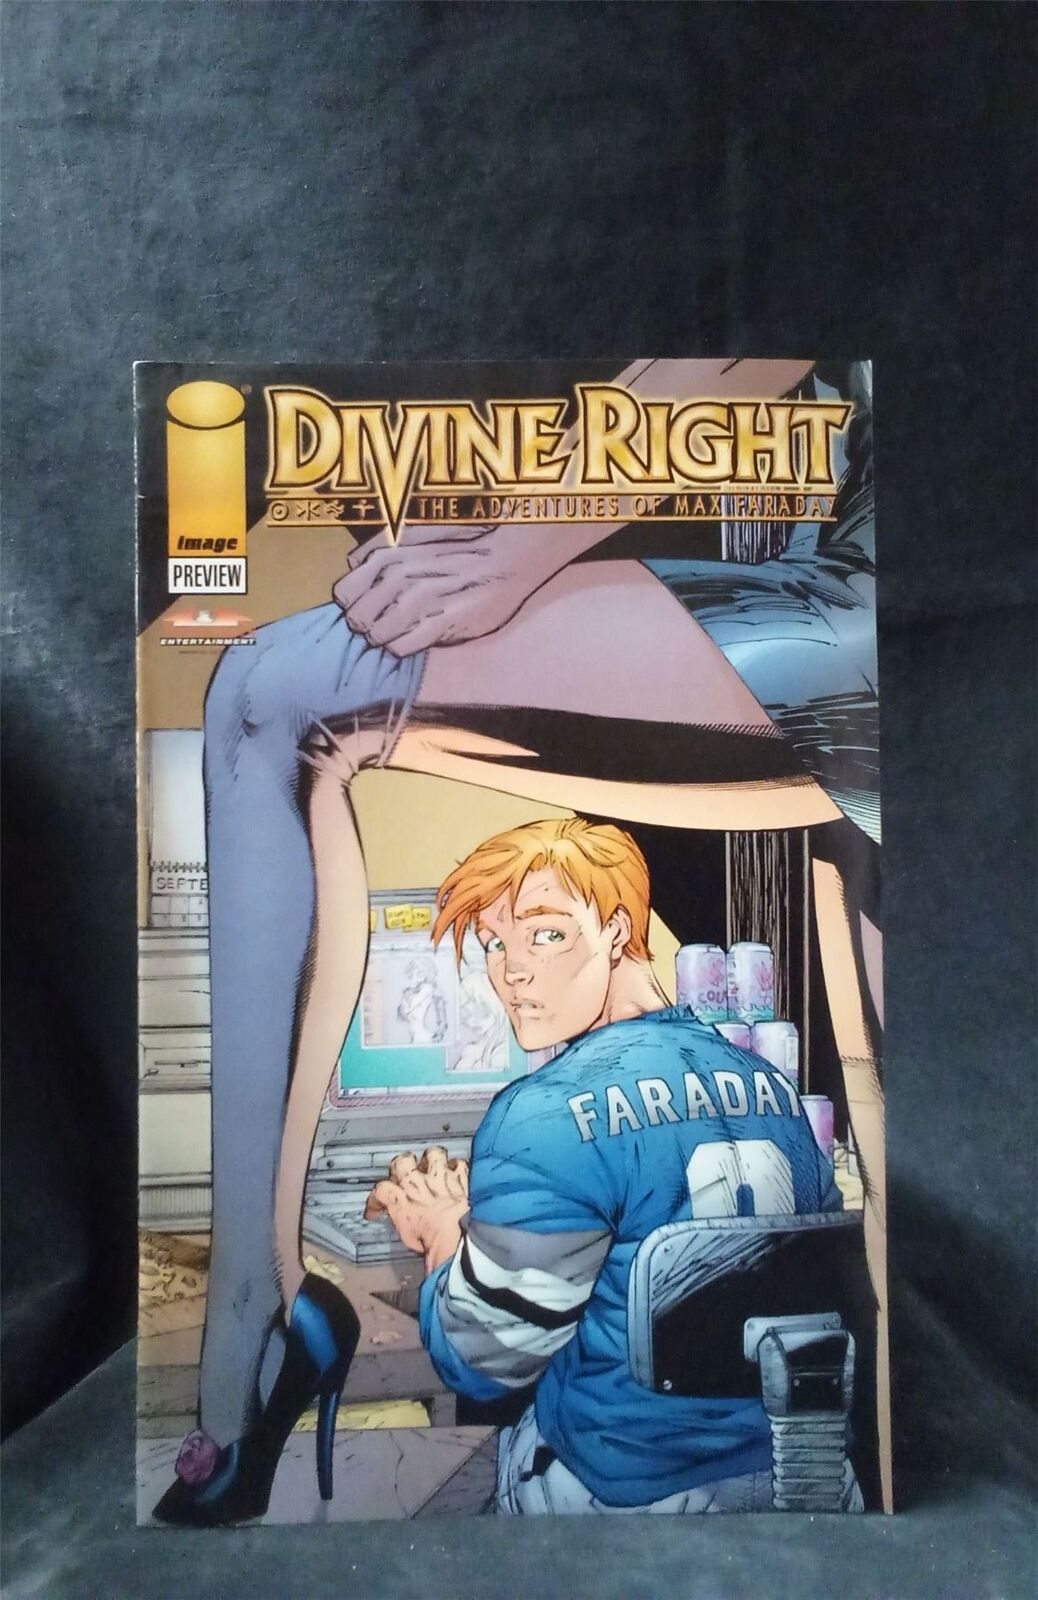 Divine Right: The Adventures of Max Faraday #0 Preview Var 1997 wildstorm Comic